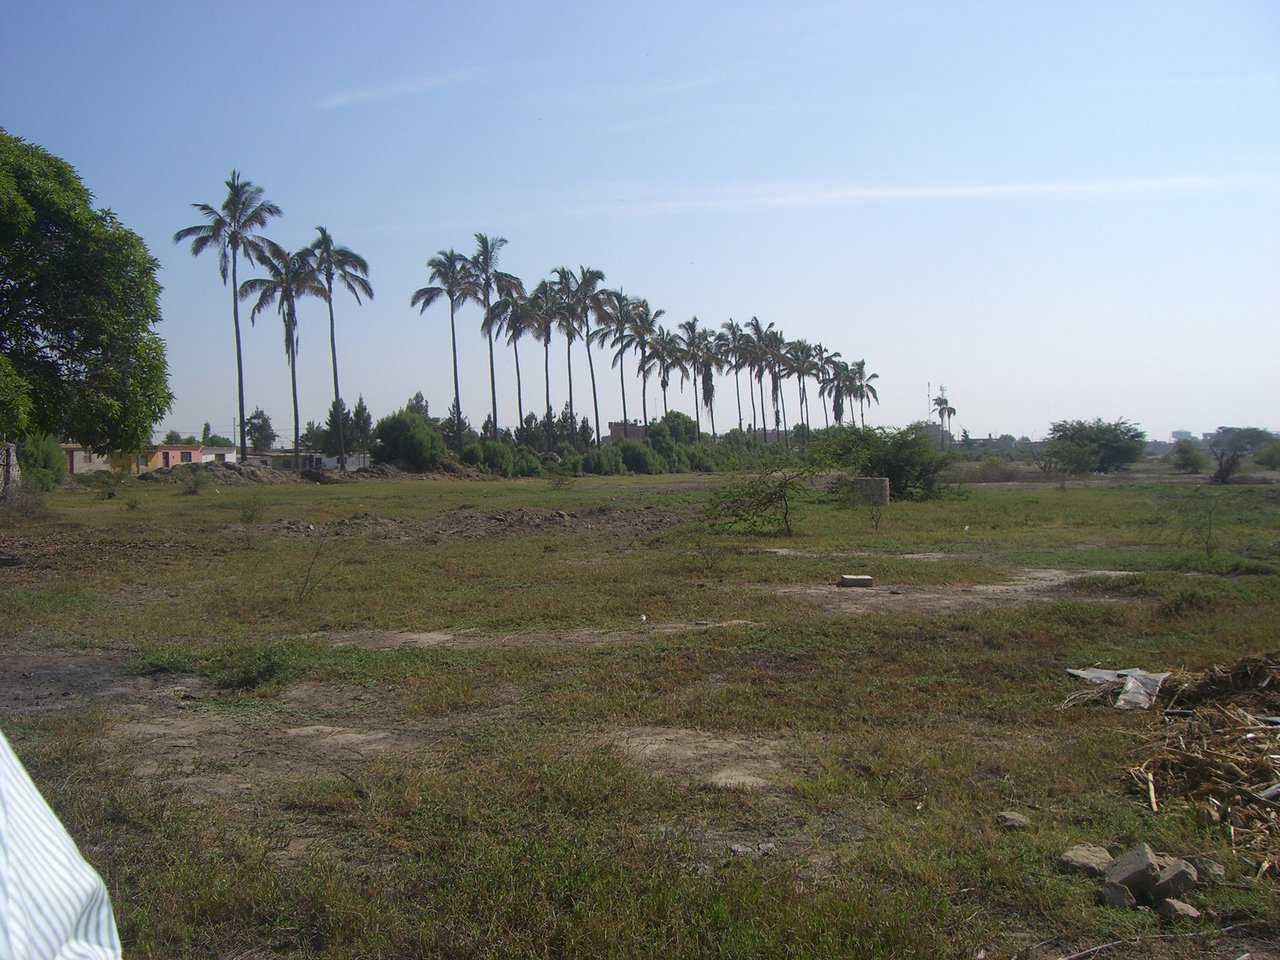 La Peña, Lambayeque — This is SUBE’s first project (138 pre-sold homes on 10 acres).  They hope to break ground in October 2010.